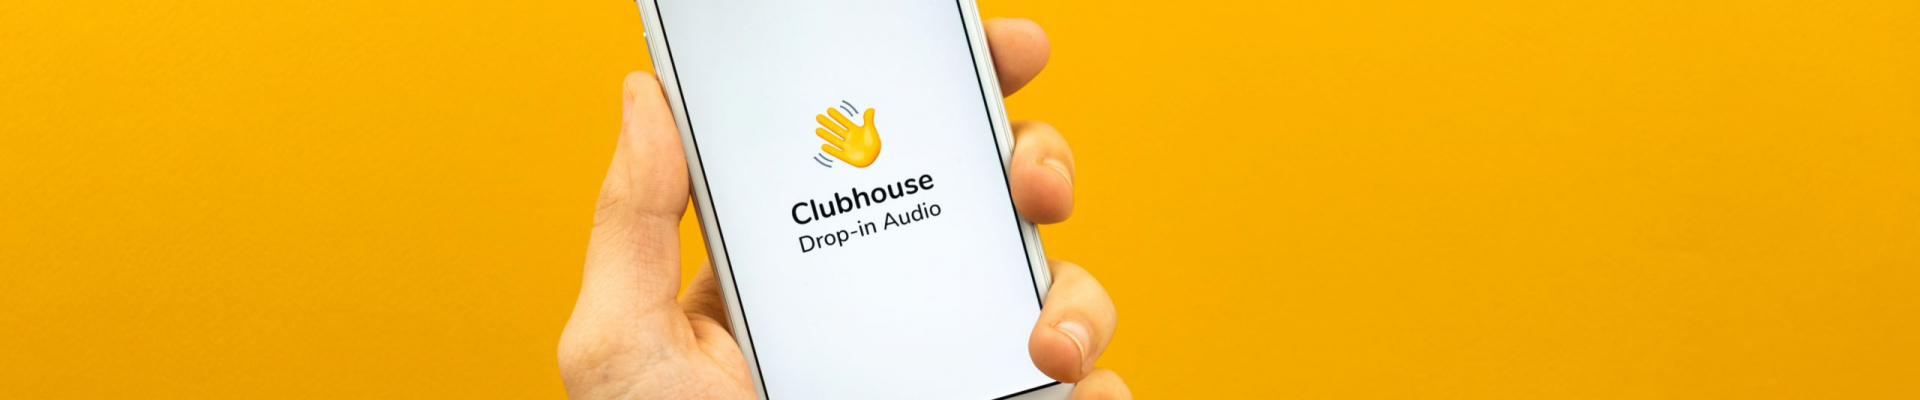 Clubhouse marketing